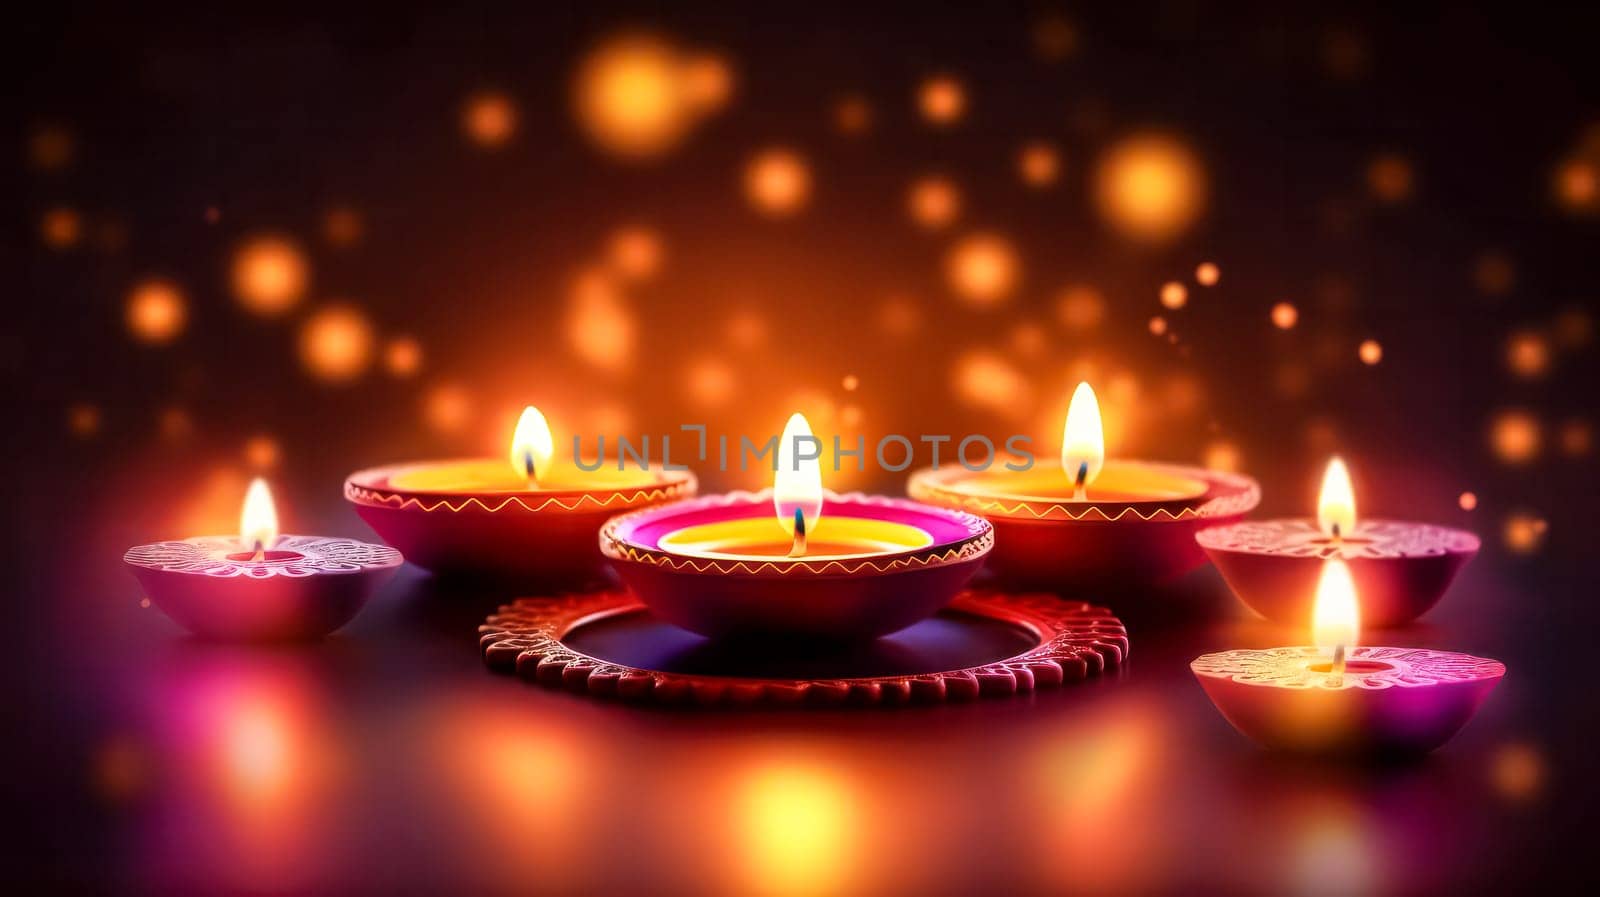 Experience the radiant beauty of Diwali, the Indian festival of lights, with traditional diya oil lamps and bright yellow flowers. Celebrate Diwali in style